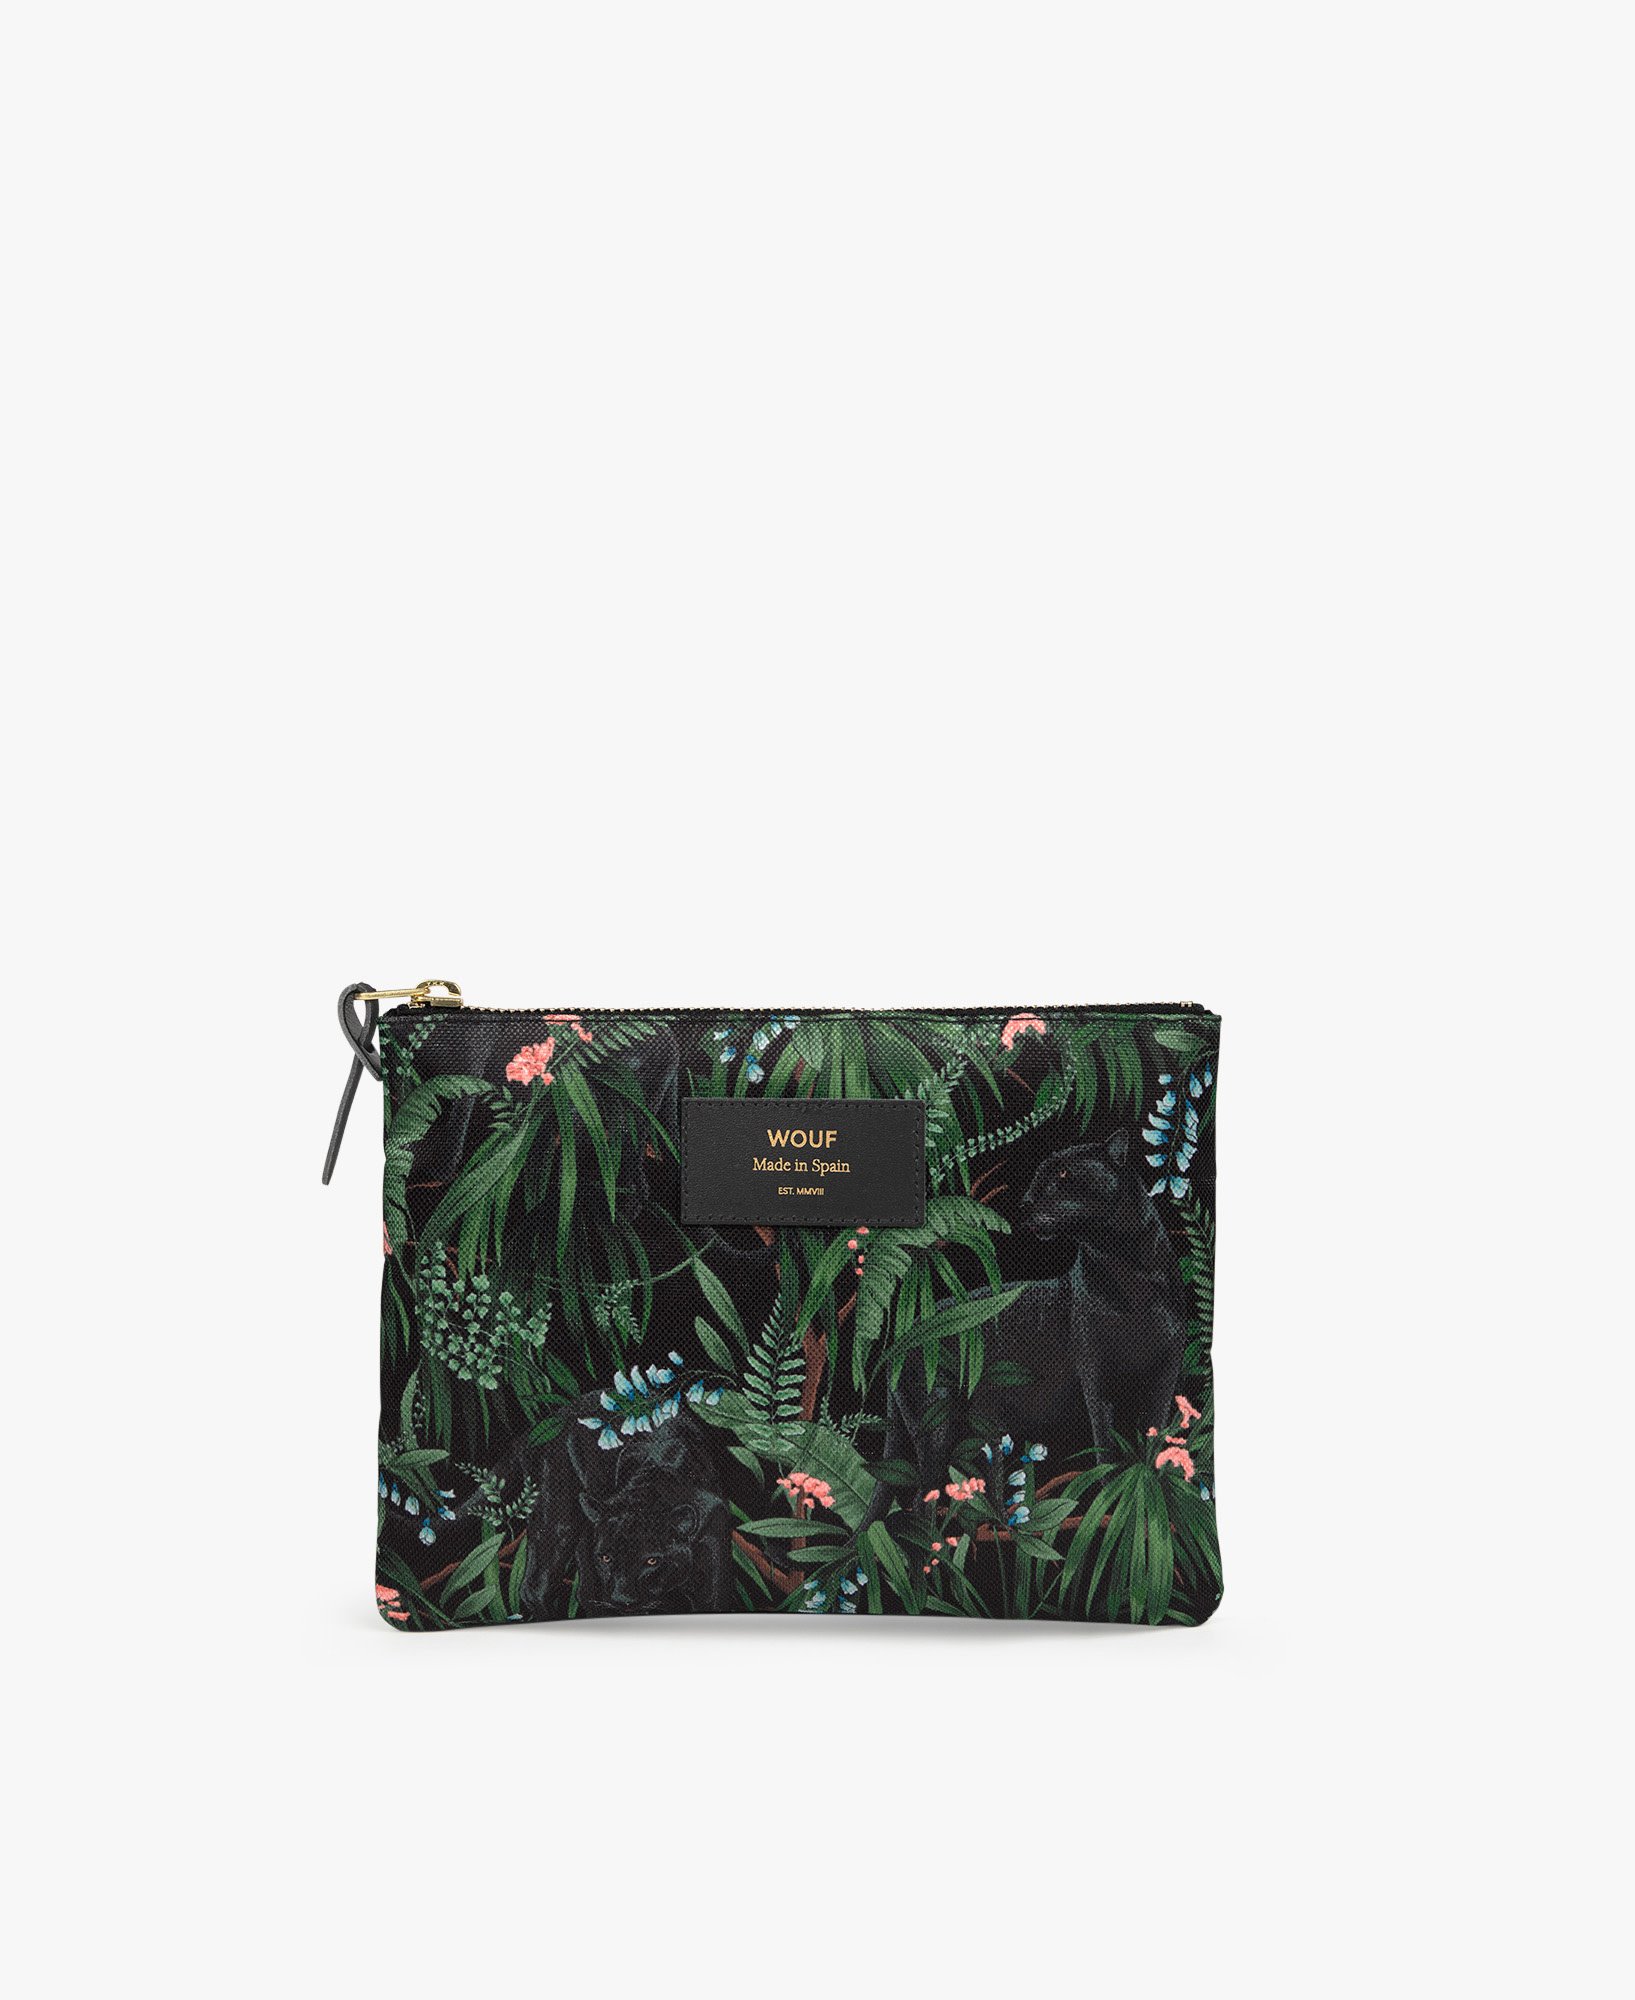 Wouf Janne large pouch